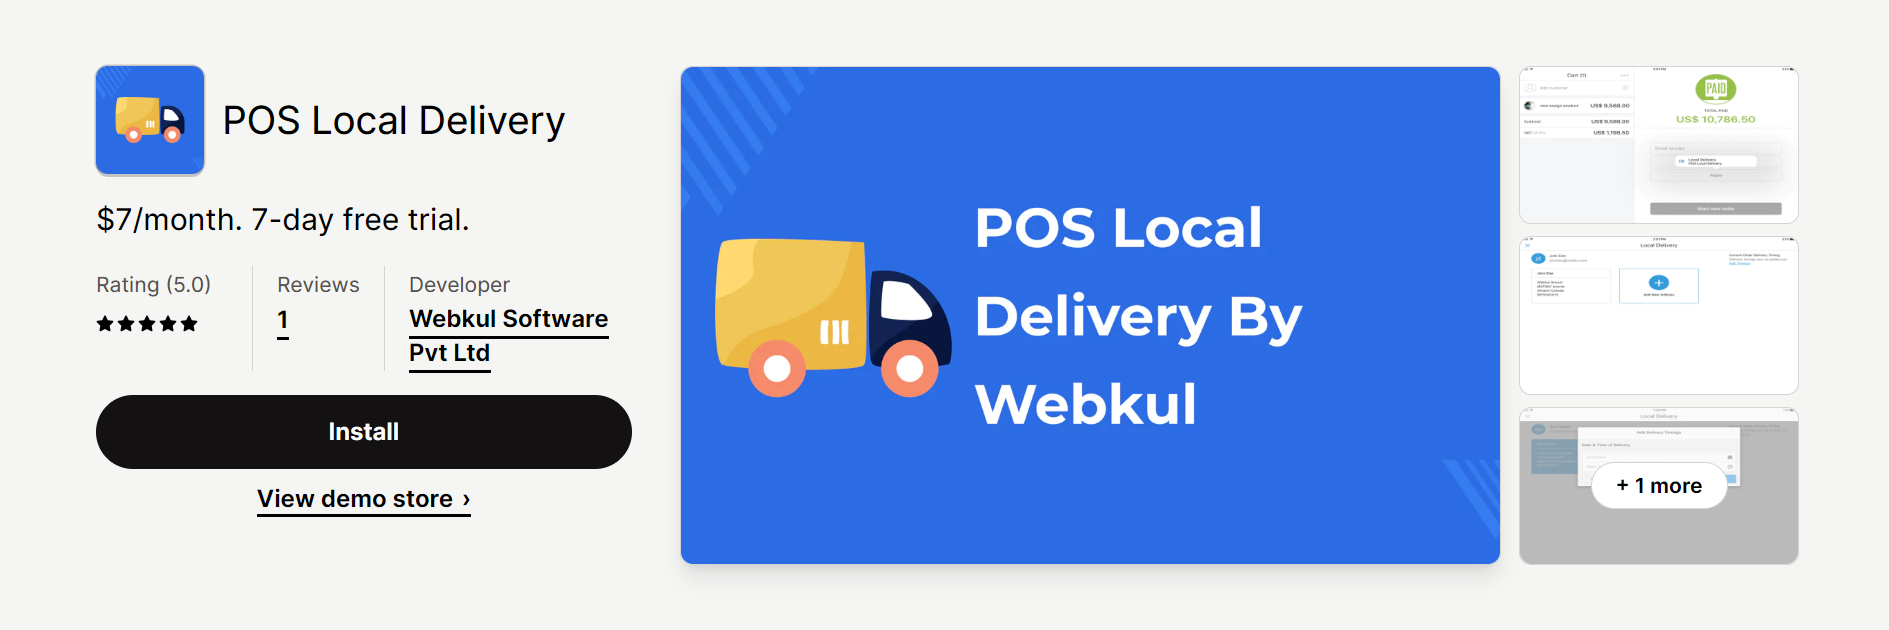 2. POS Local Delivery